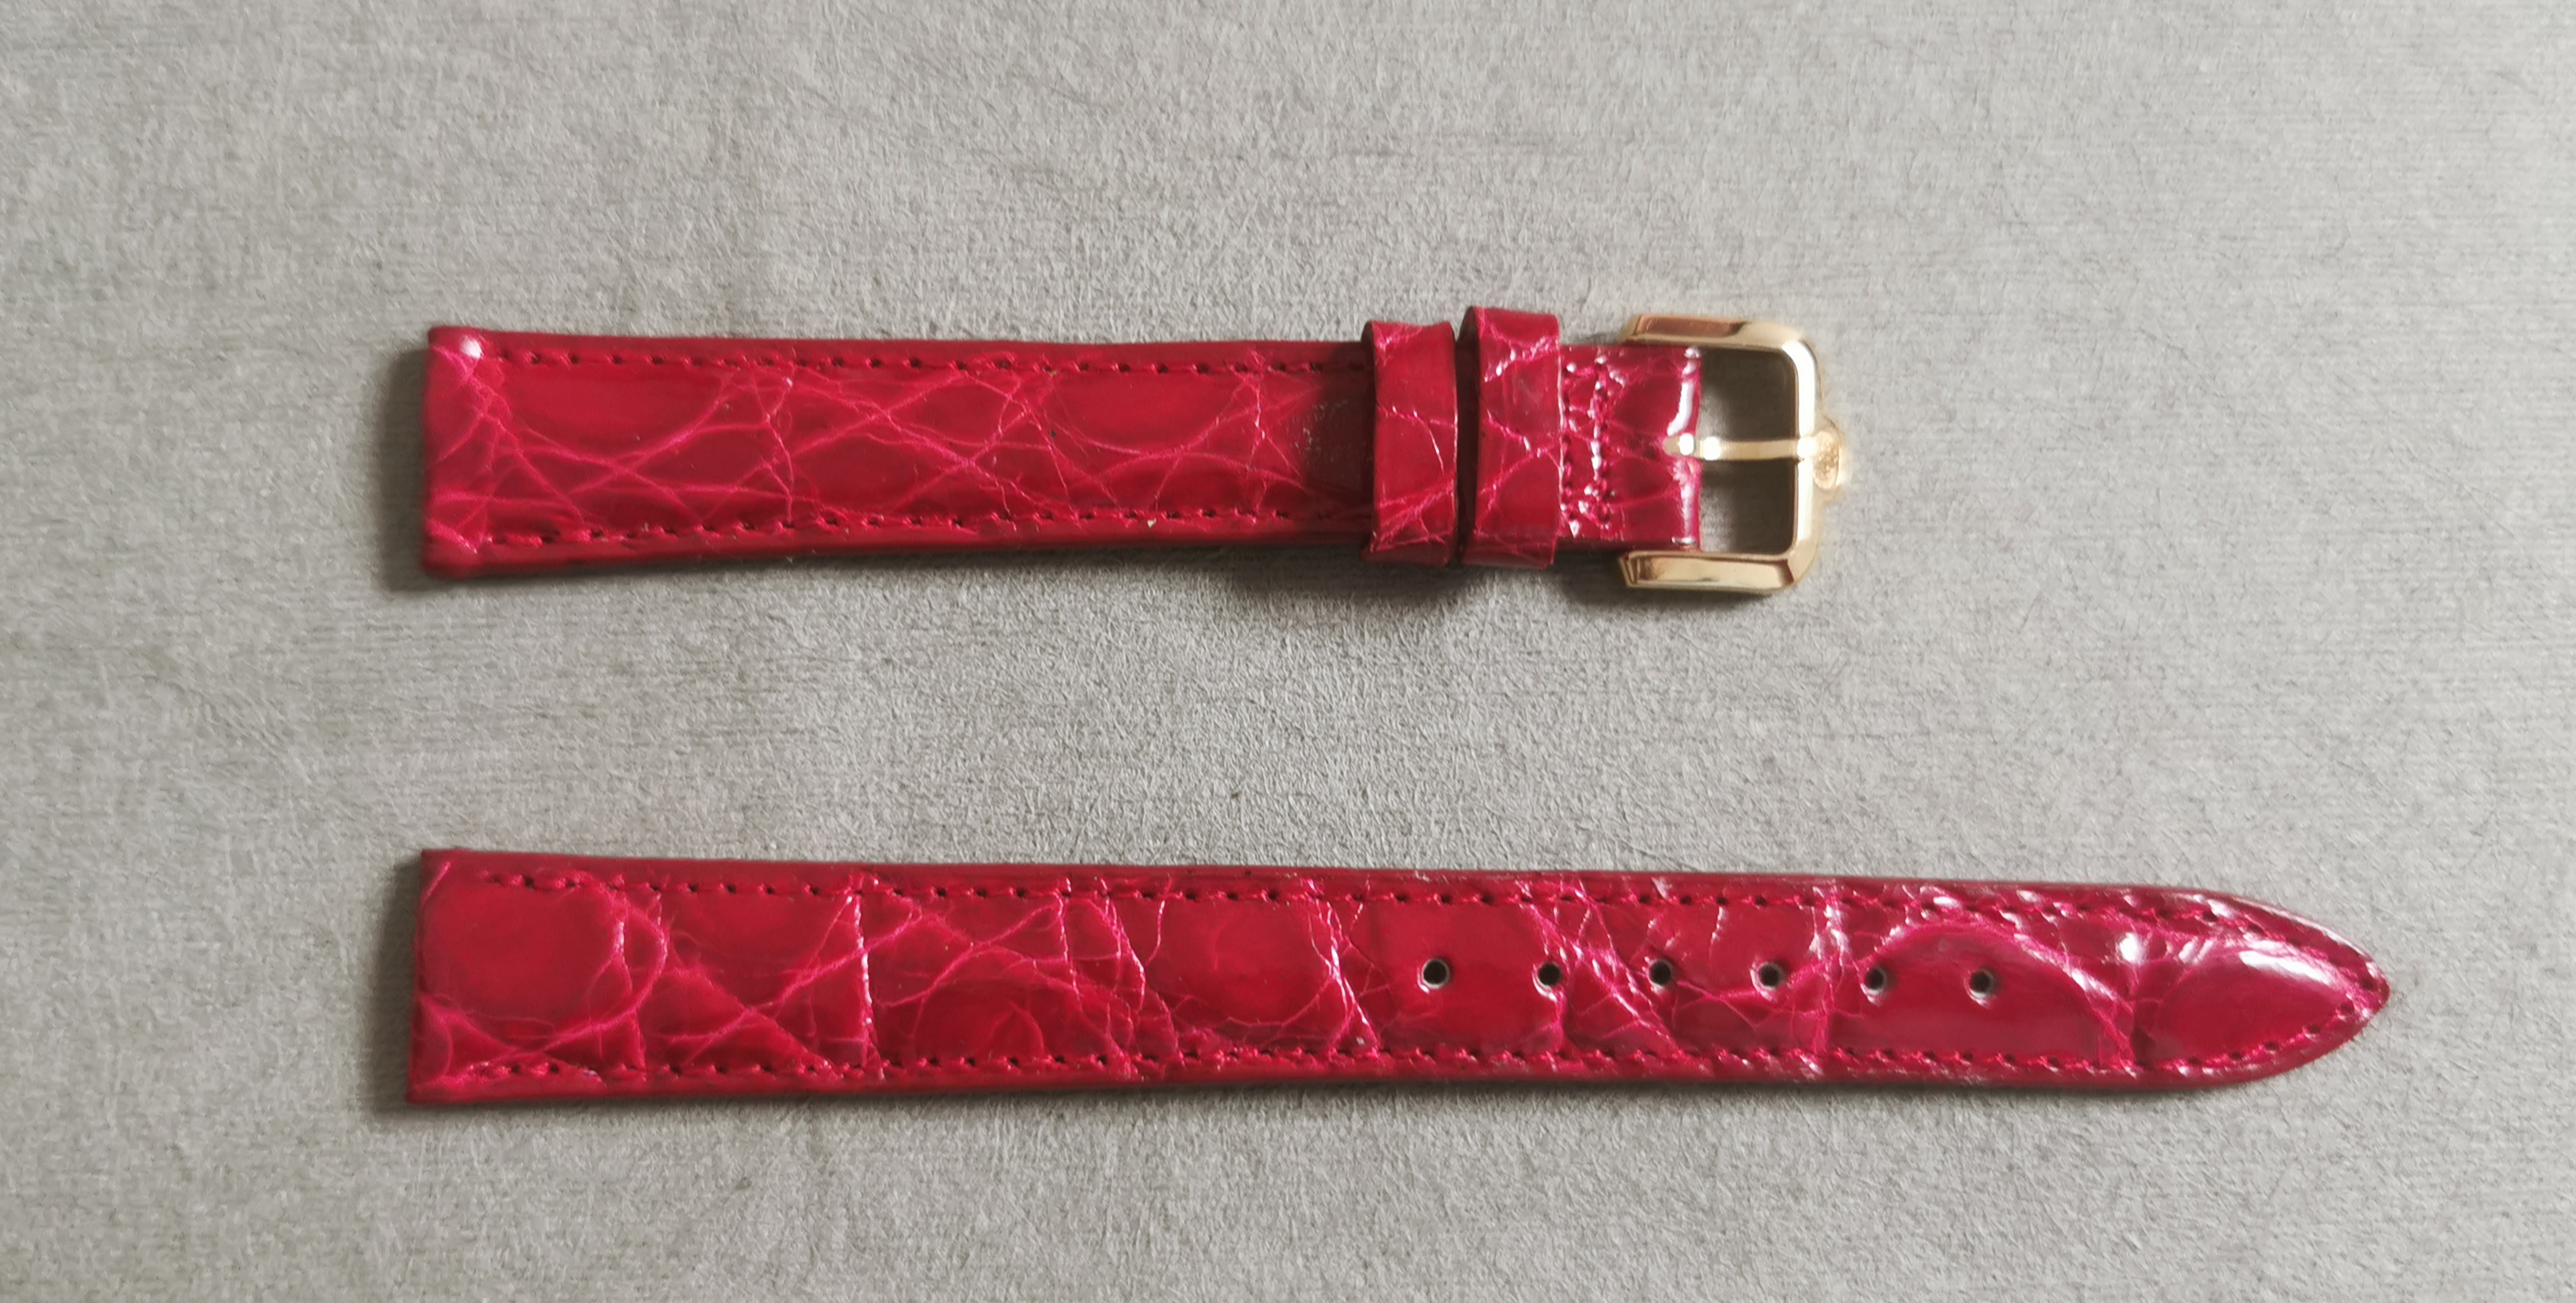 Paul Picot leather croco red strap mm 14/12 with gold plated buckle newoldstock condition | San Giorgio a Cremano